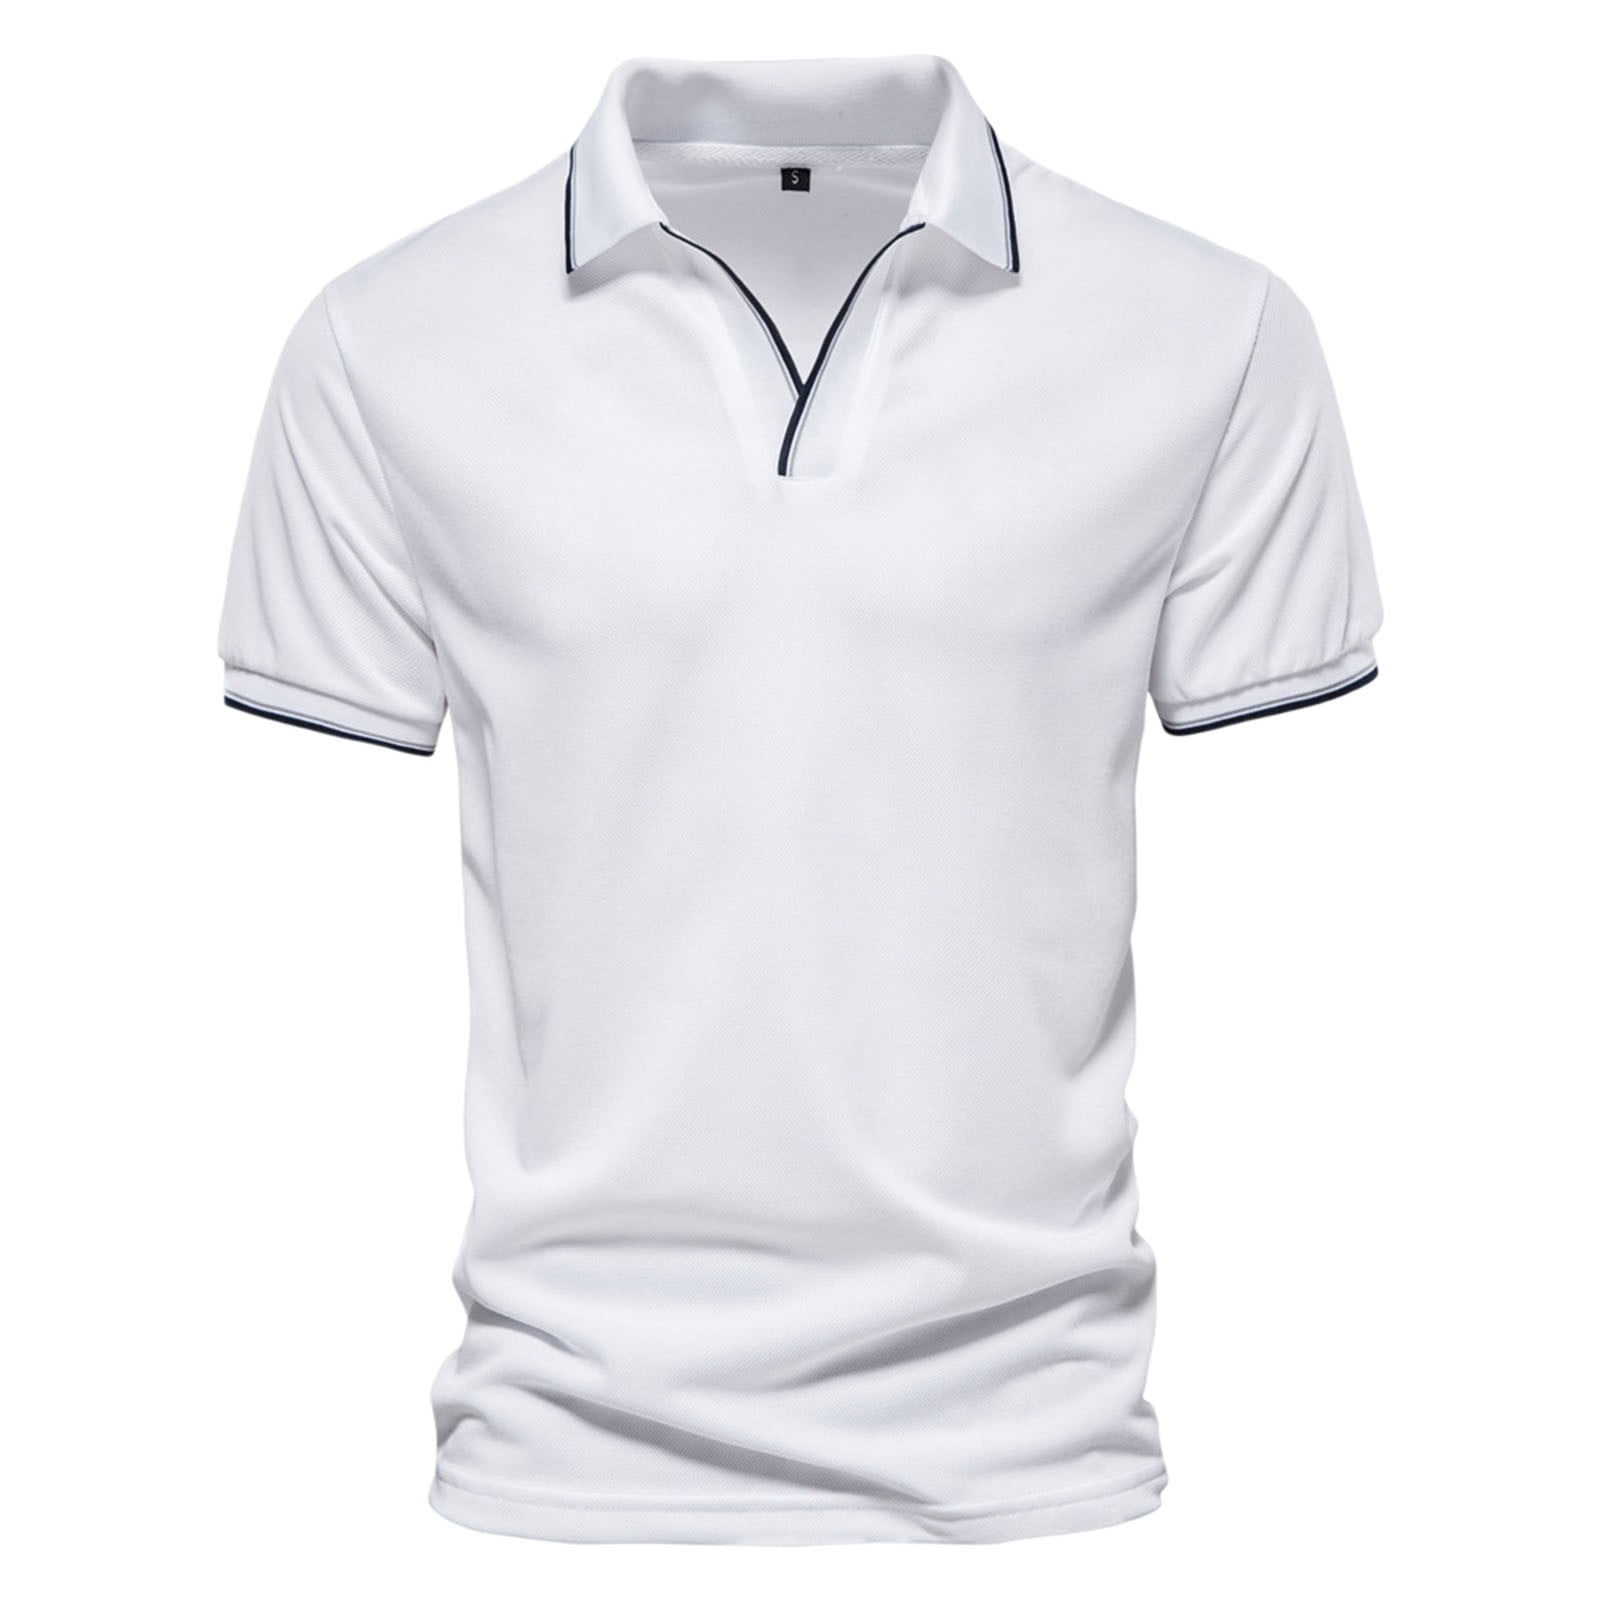 New Premium Unisex Short Sleeve Solid Color Classical Polo T